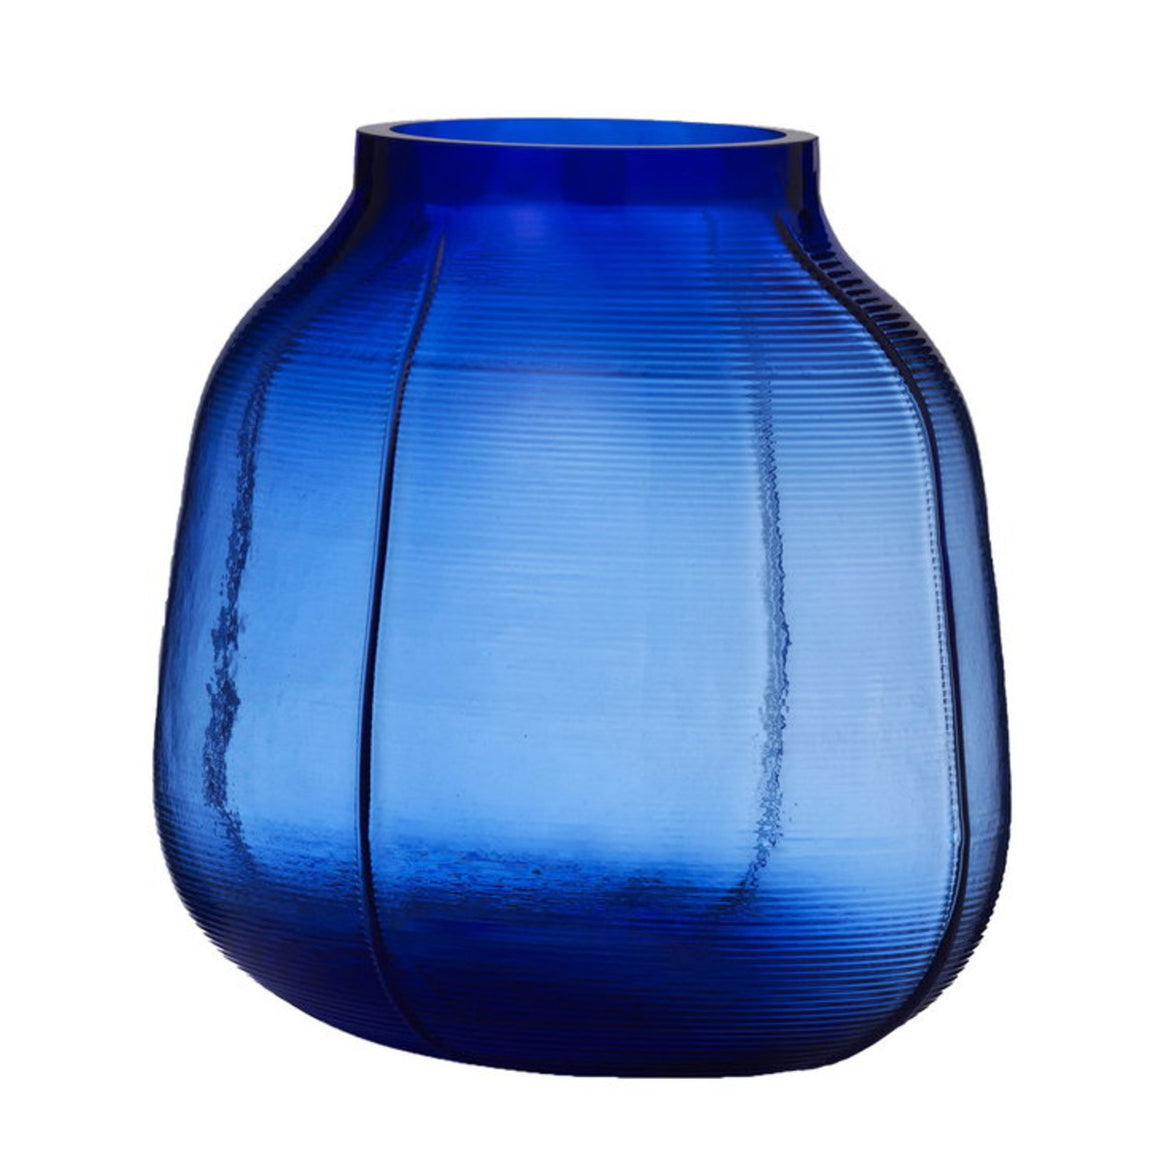 Image featuring a moulded coloured (navy blue) glass vase